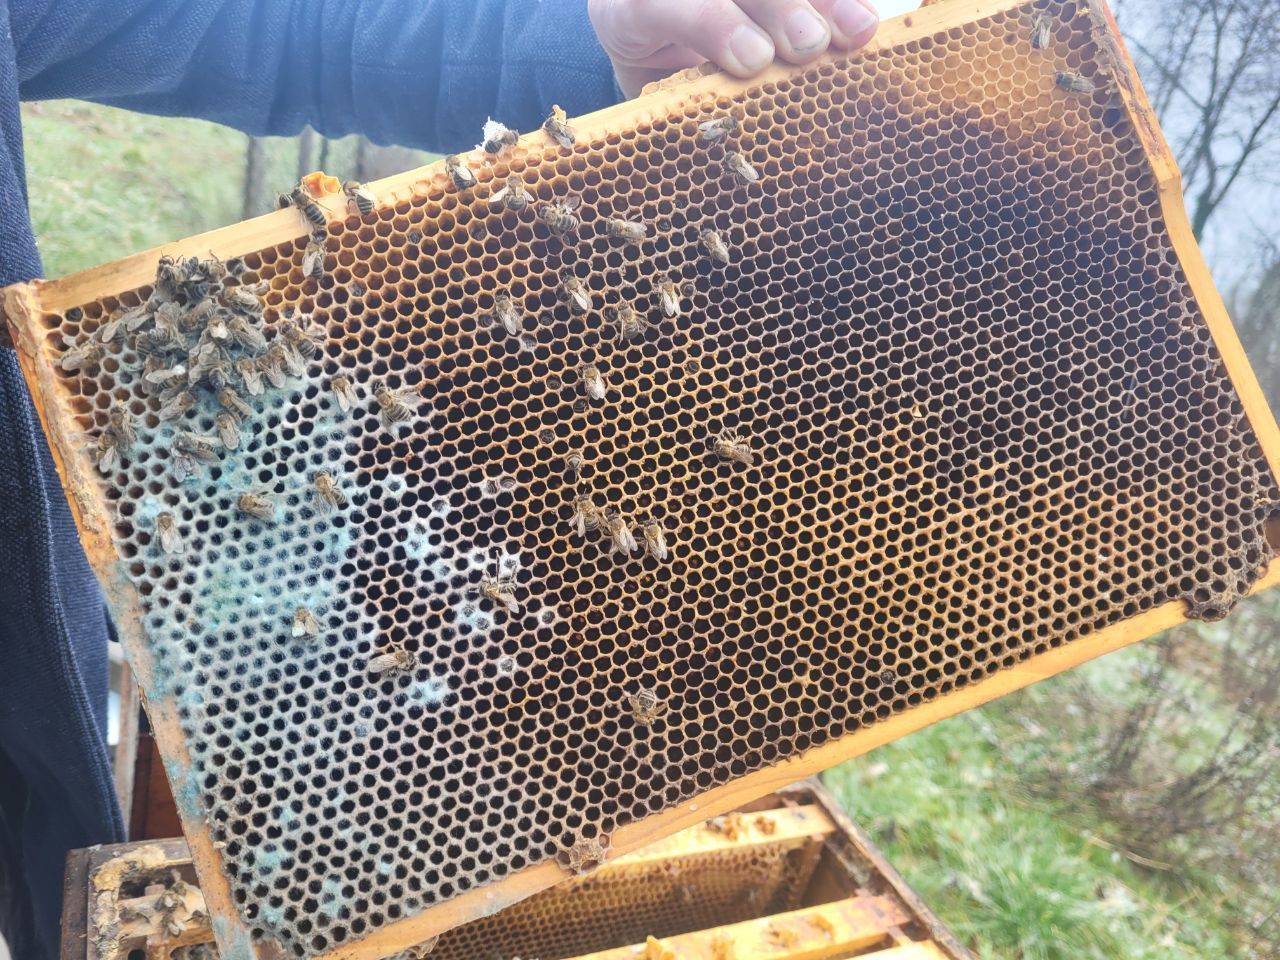 Rise and shine! How are our Seibert bees doing after the winter? - seibert bees on the comb